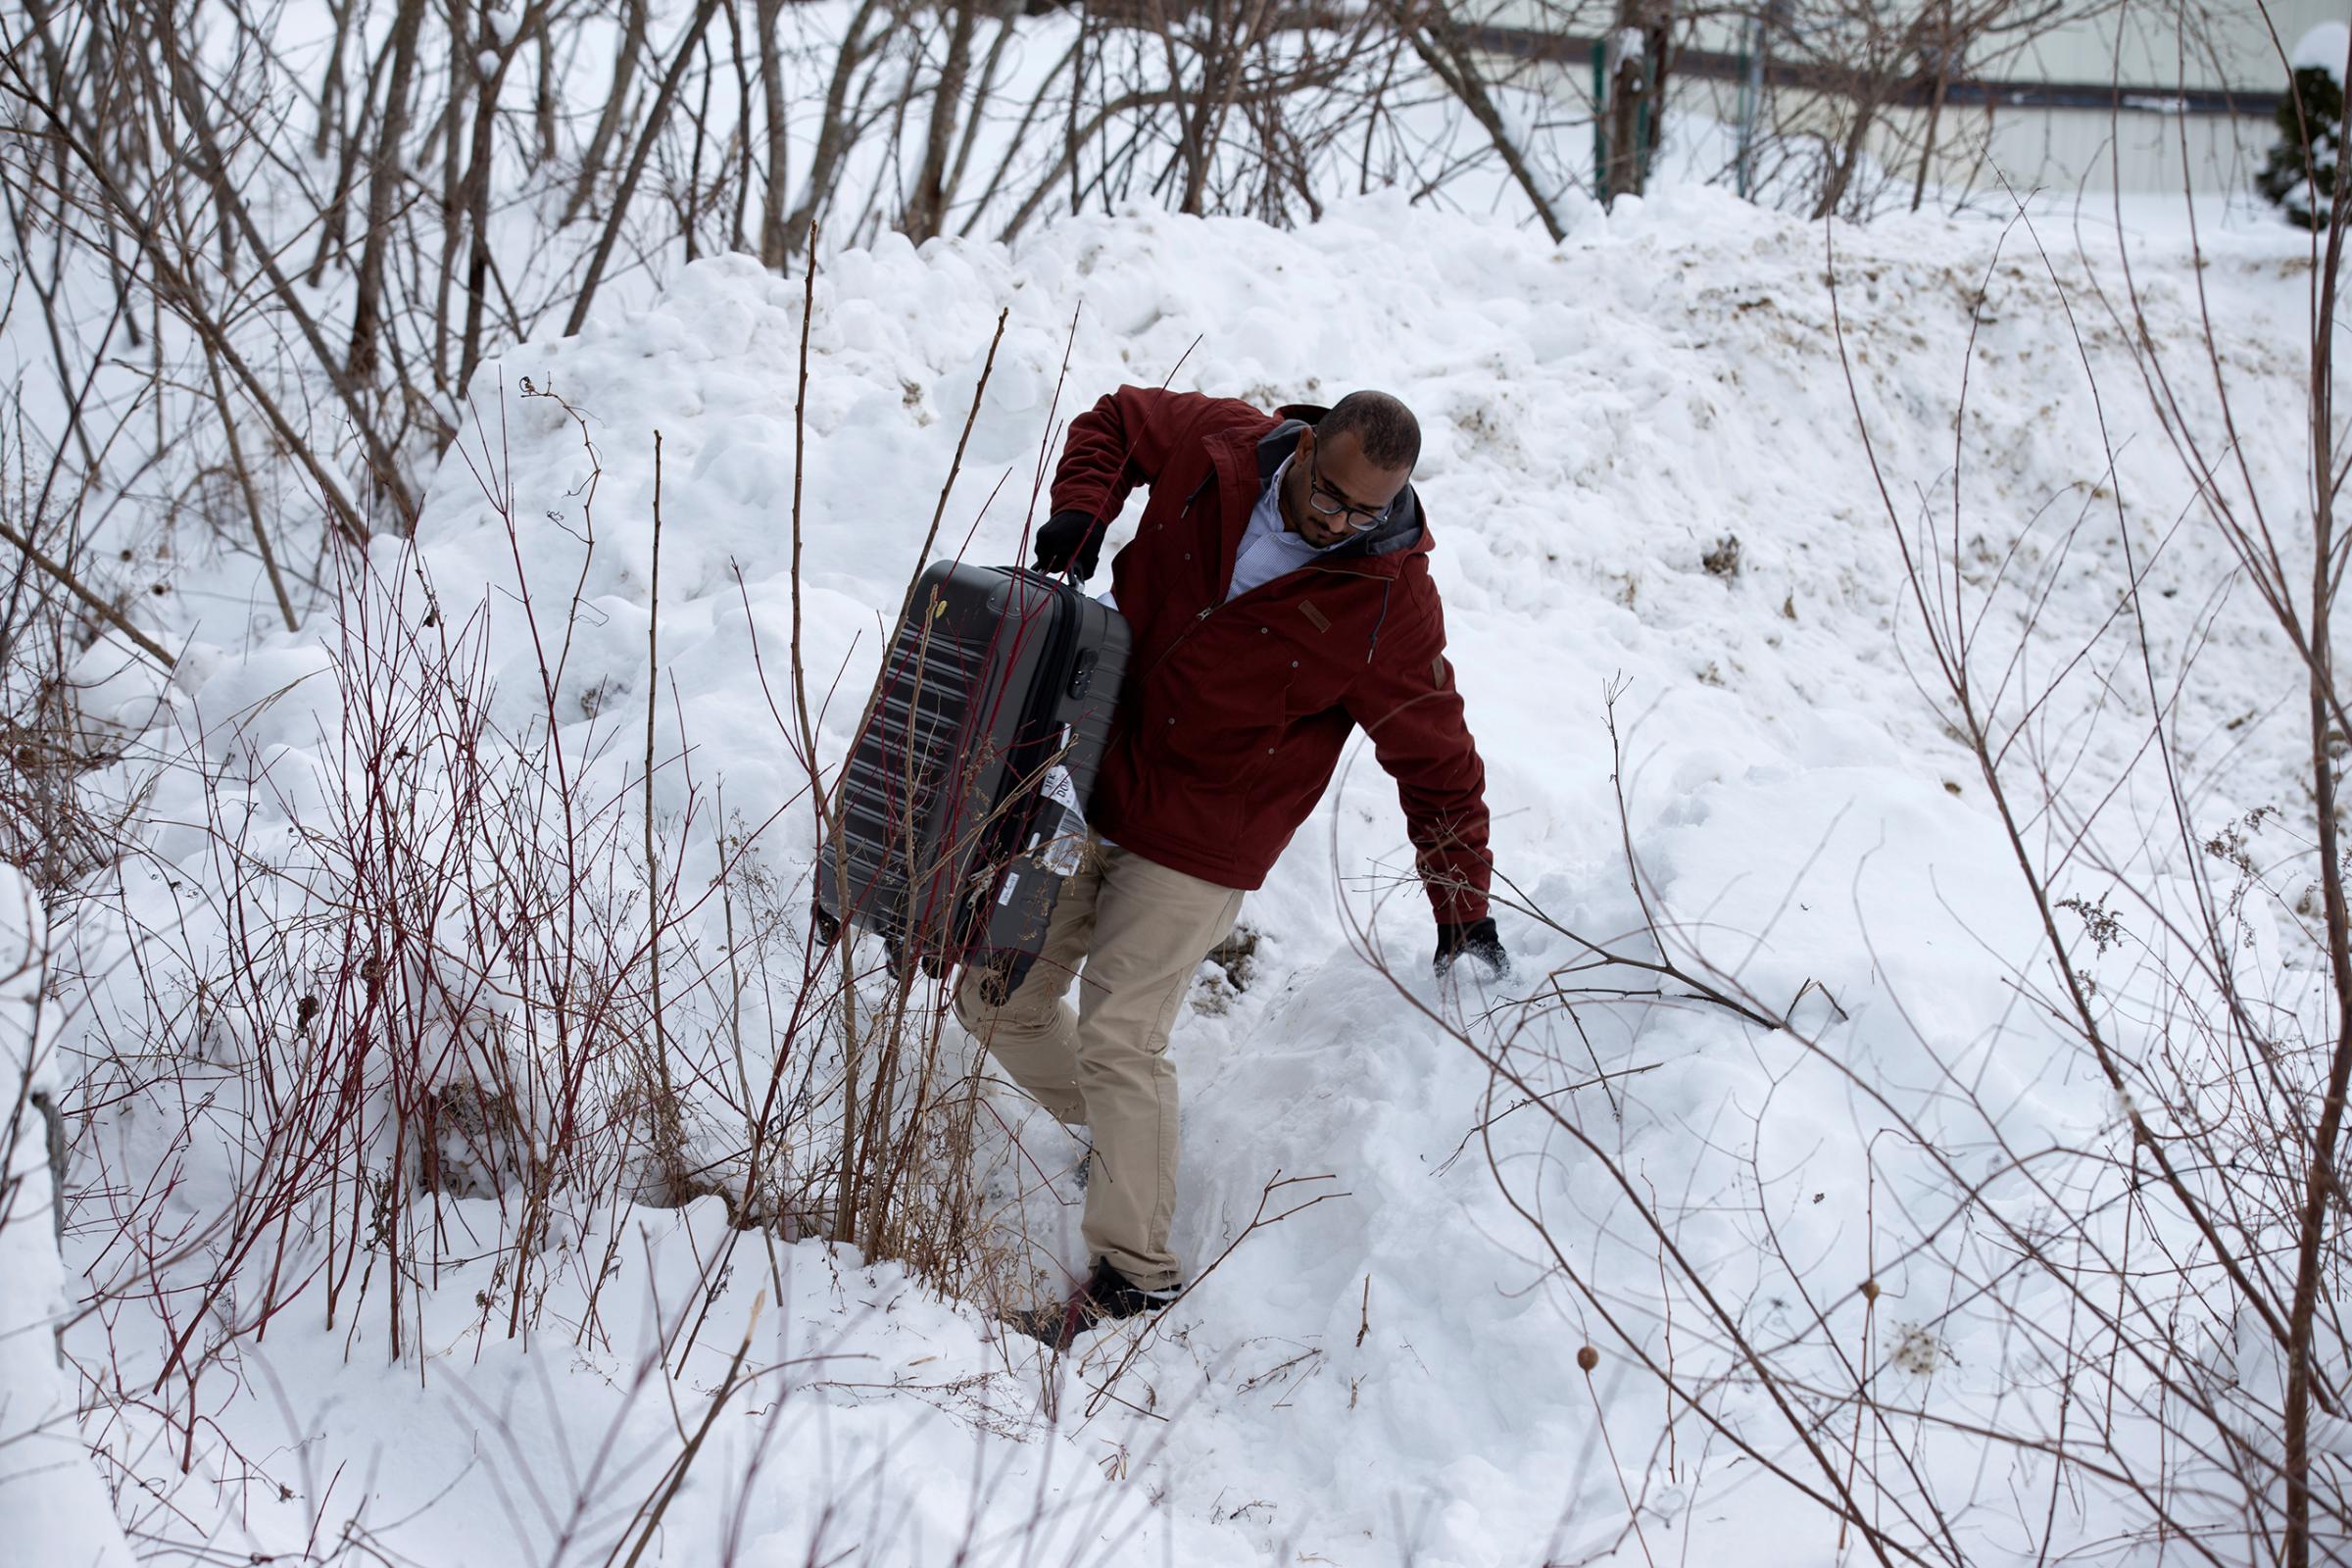 A man from Yemen crosses the U.S.-Canada border into Hemmingford, Quebec